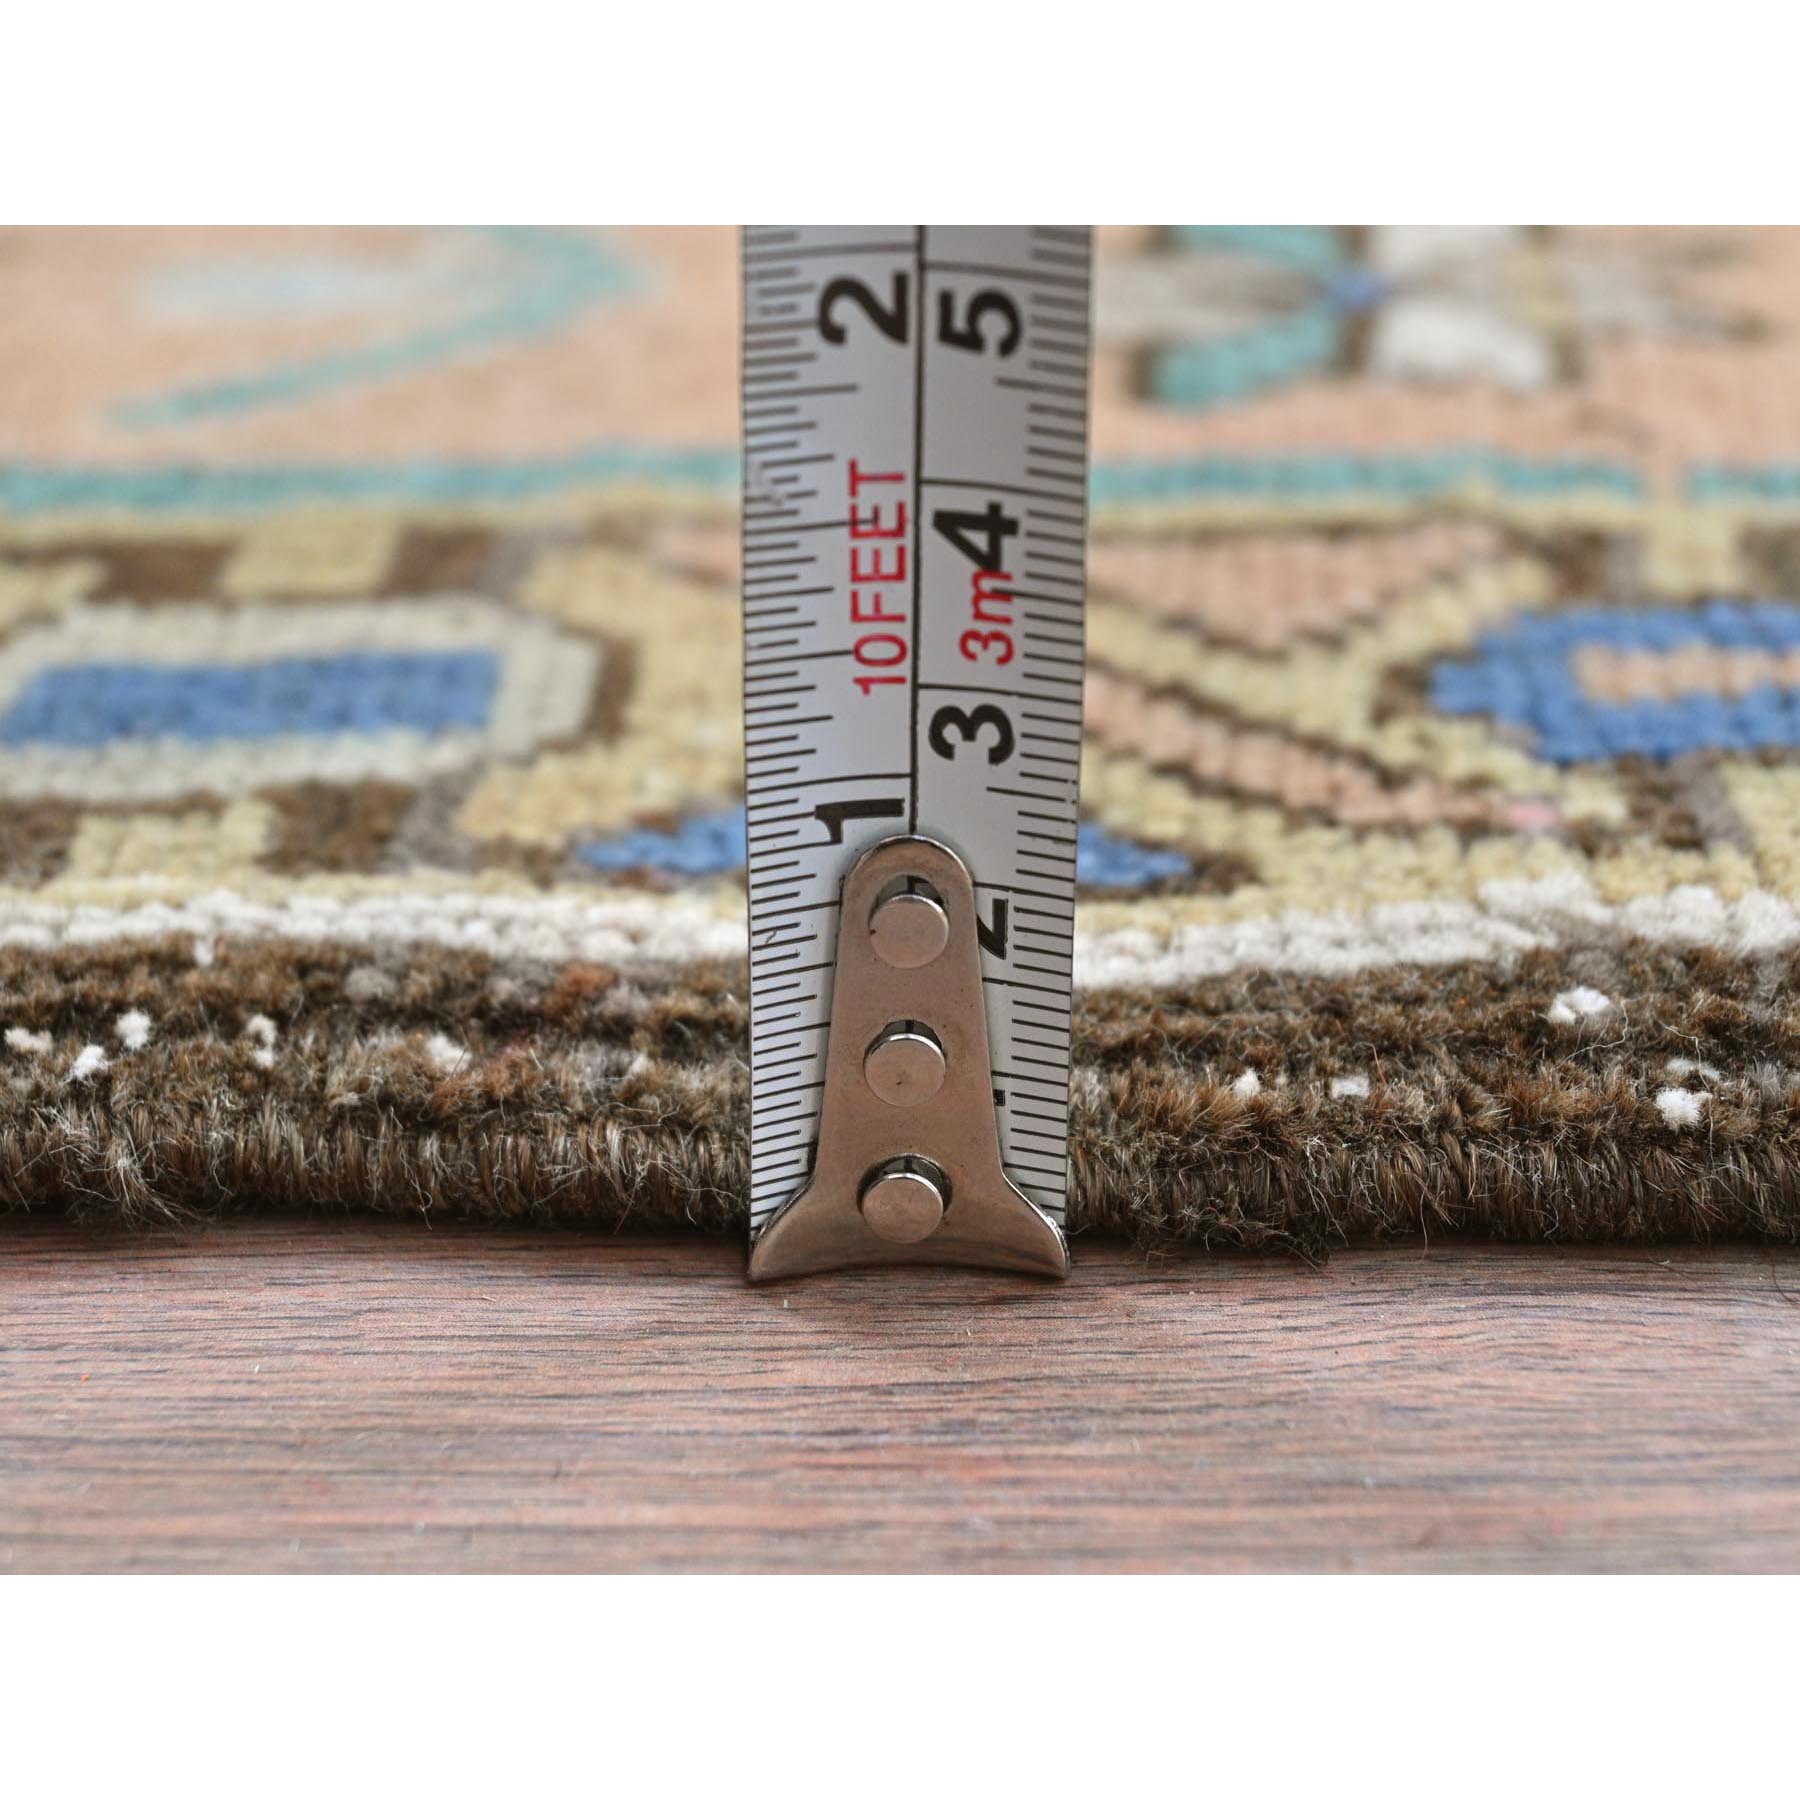 4'x10'8" Almond Brown, Vintage Northwest Persian with Large Elements Medallions, Small Animal and Human Figurines, Clean, Worn Down, Pure Wool Hand Woven Wide Runner Oriental Rug 